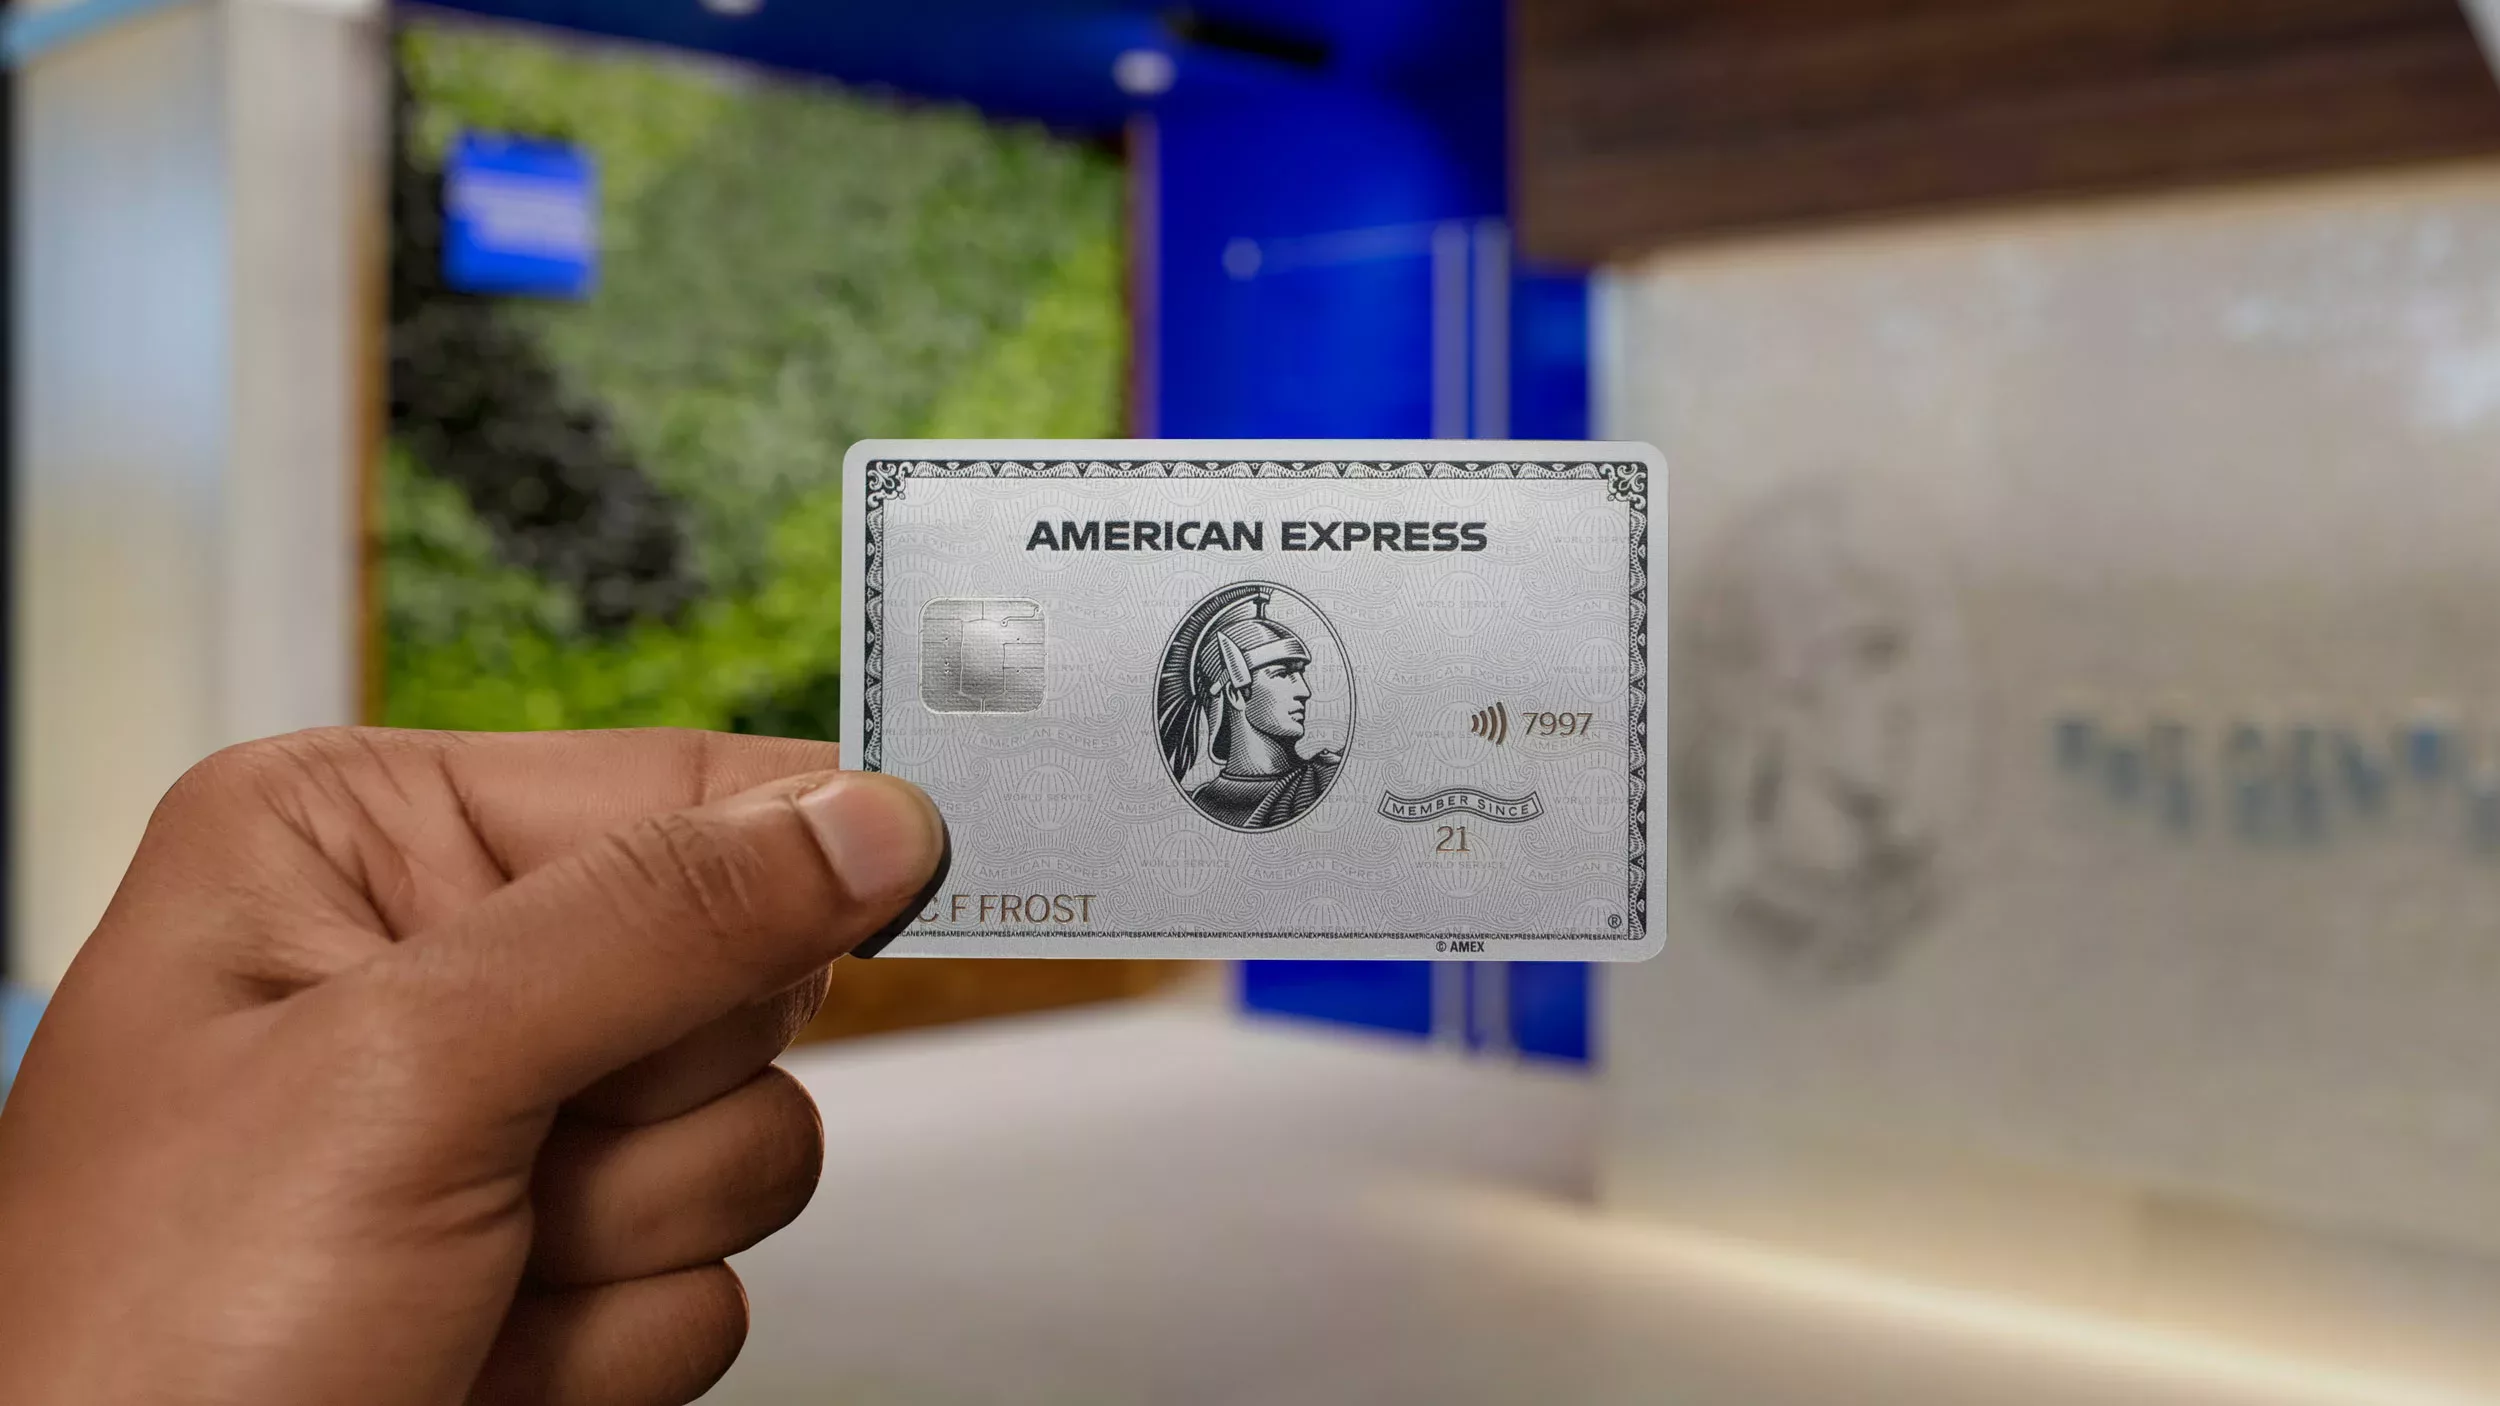 The Platinum Card includes the Amex cell phone protection benefit